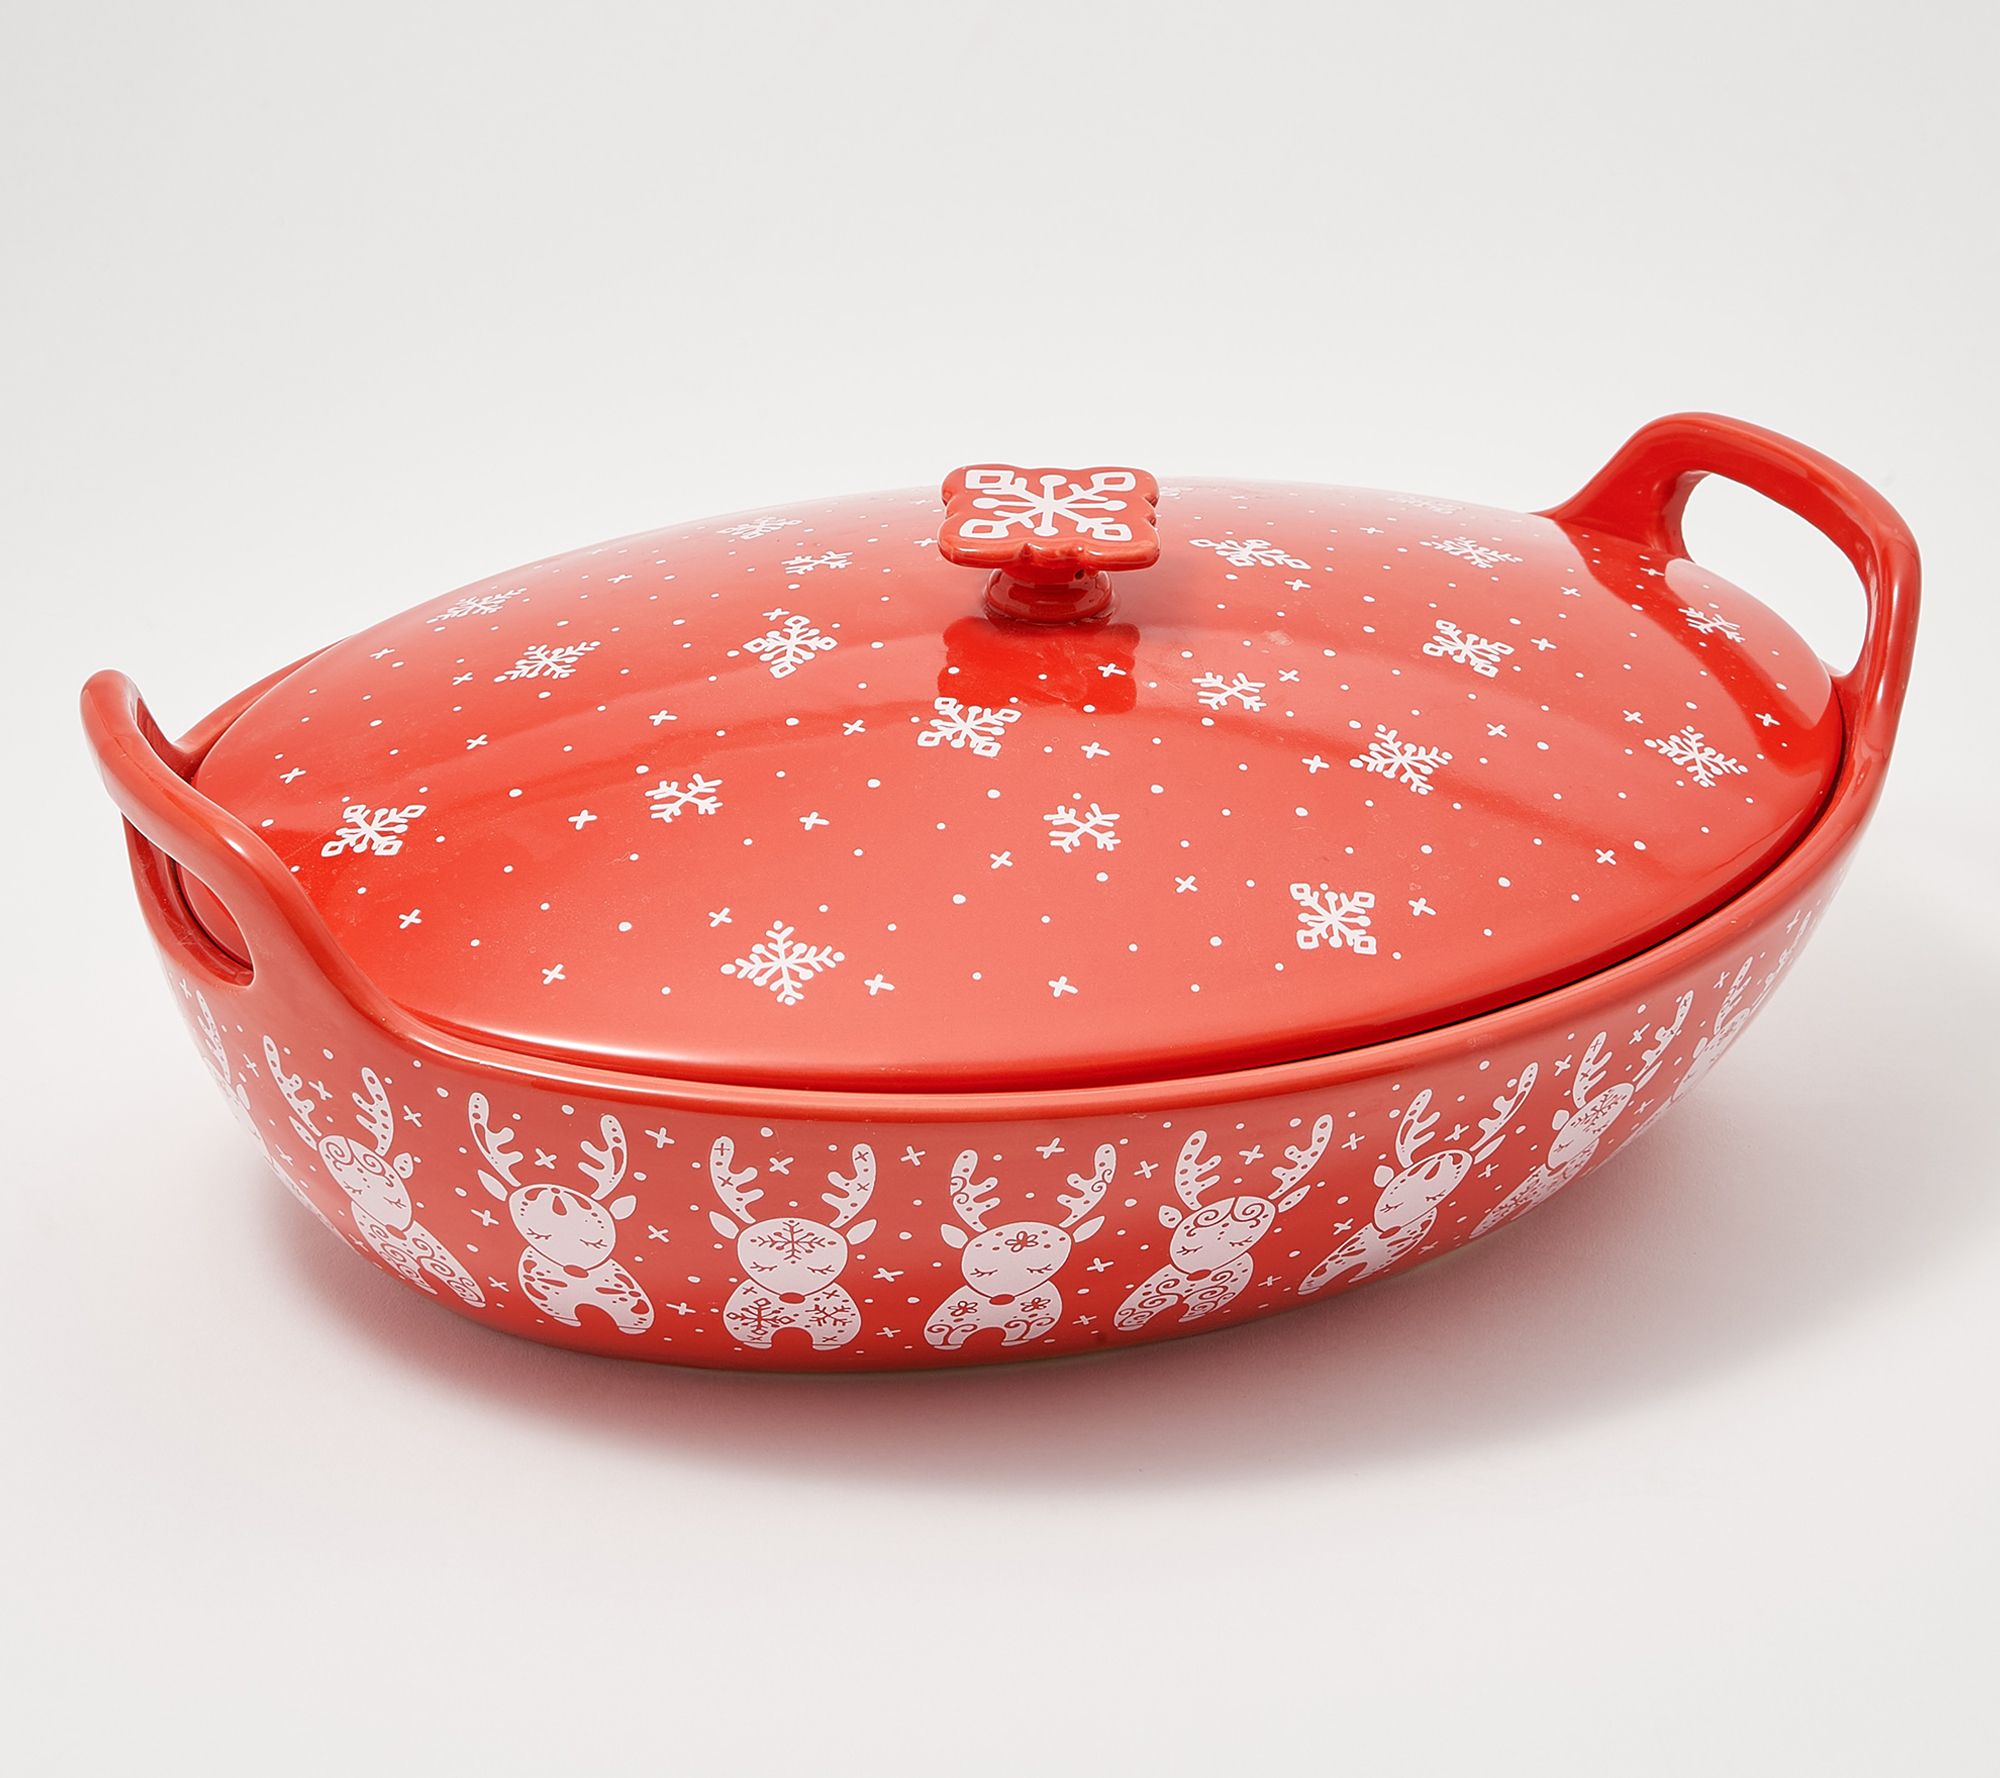 The ABCD Diaries: #GiftsForCooks - Aeternum Cookware by Bialetti  #HolidayGiftGuide